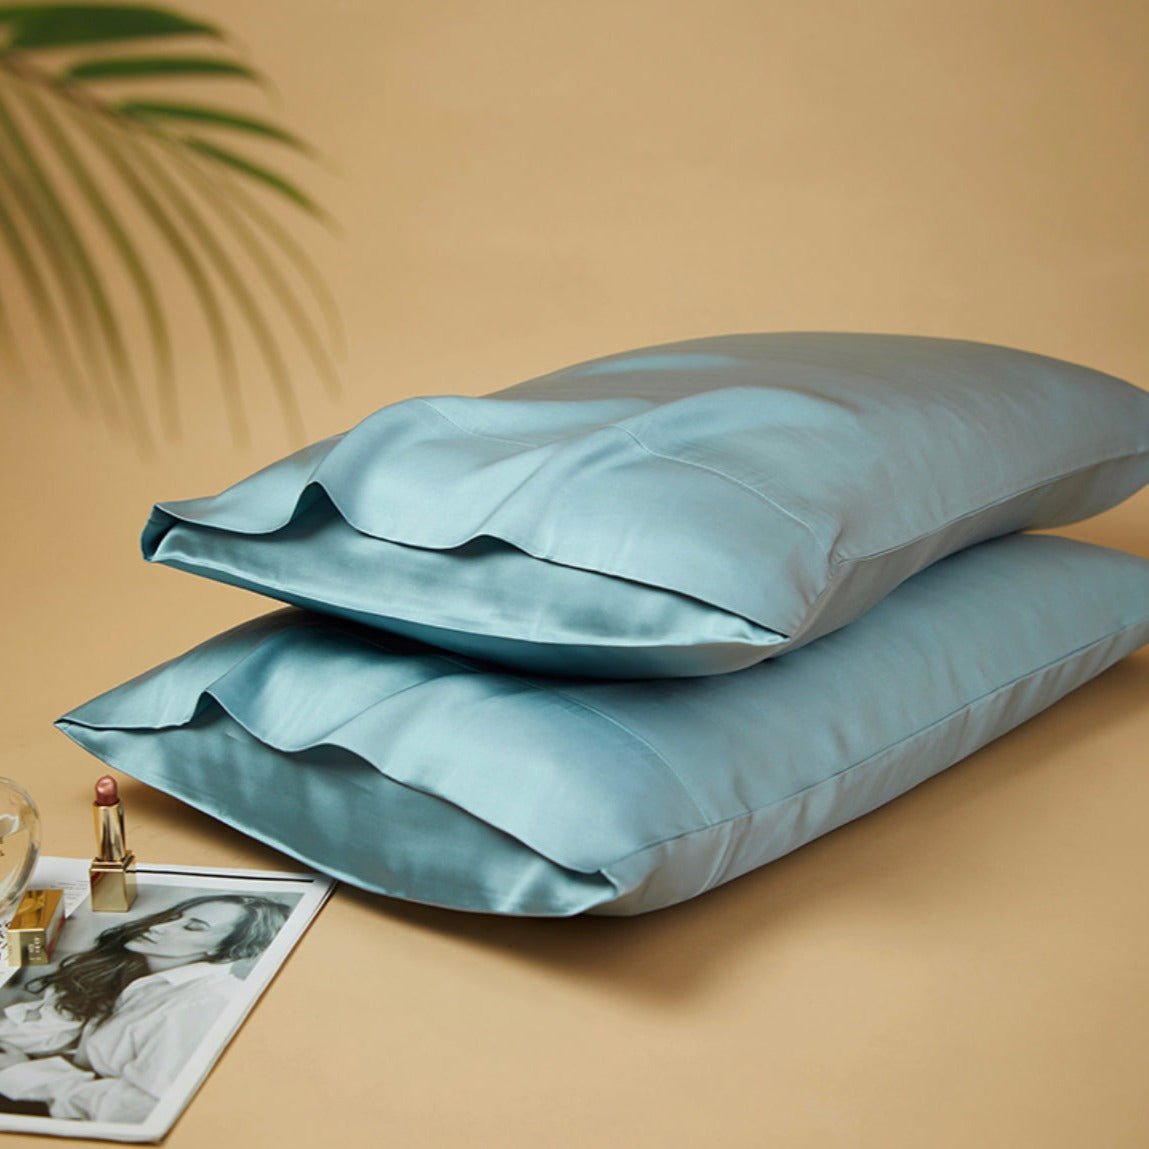 Silky Gift Box: 6A Grade Organic Mulberry Silk Pillowcase Set of 2 Pcs - 30 Momme, Pure Silk on Both Sides - 6A Grade Organic Mulberry Silk Pillowcase-Mist Blue - INSPECIAL HOME